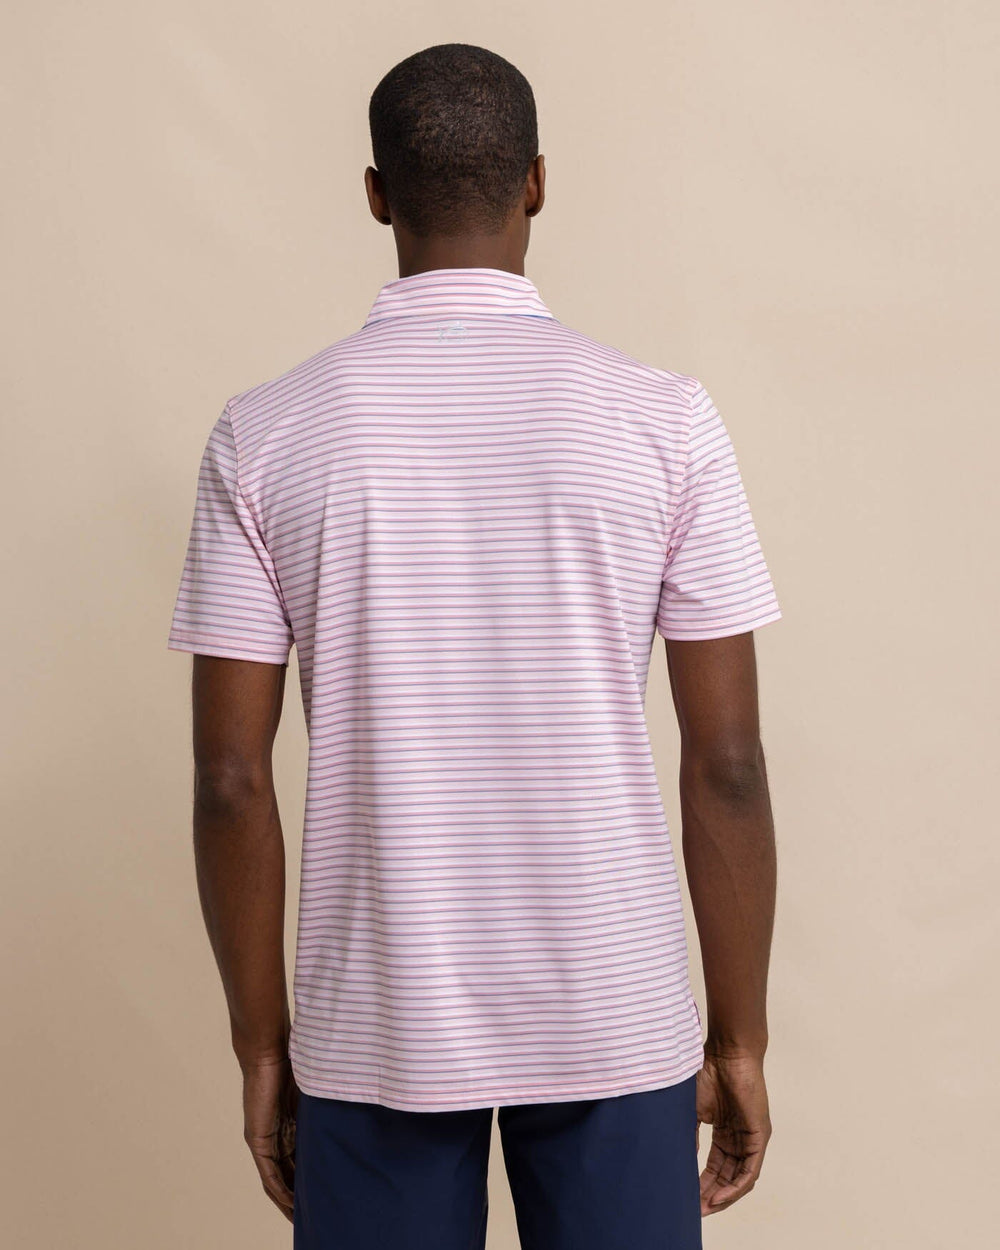 The back view of the Southern Tide Driver Carova Stripe Polo Shirt by Southern Tide - Light Pink